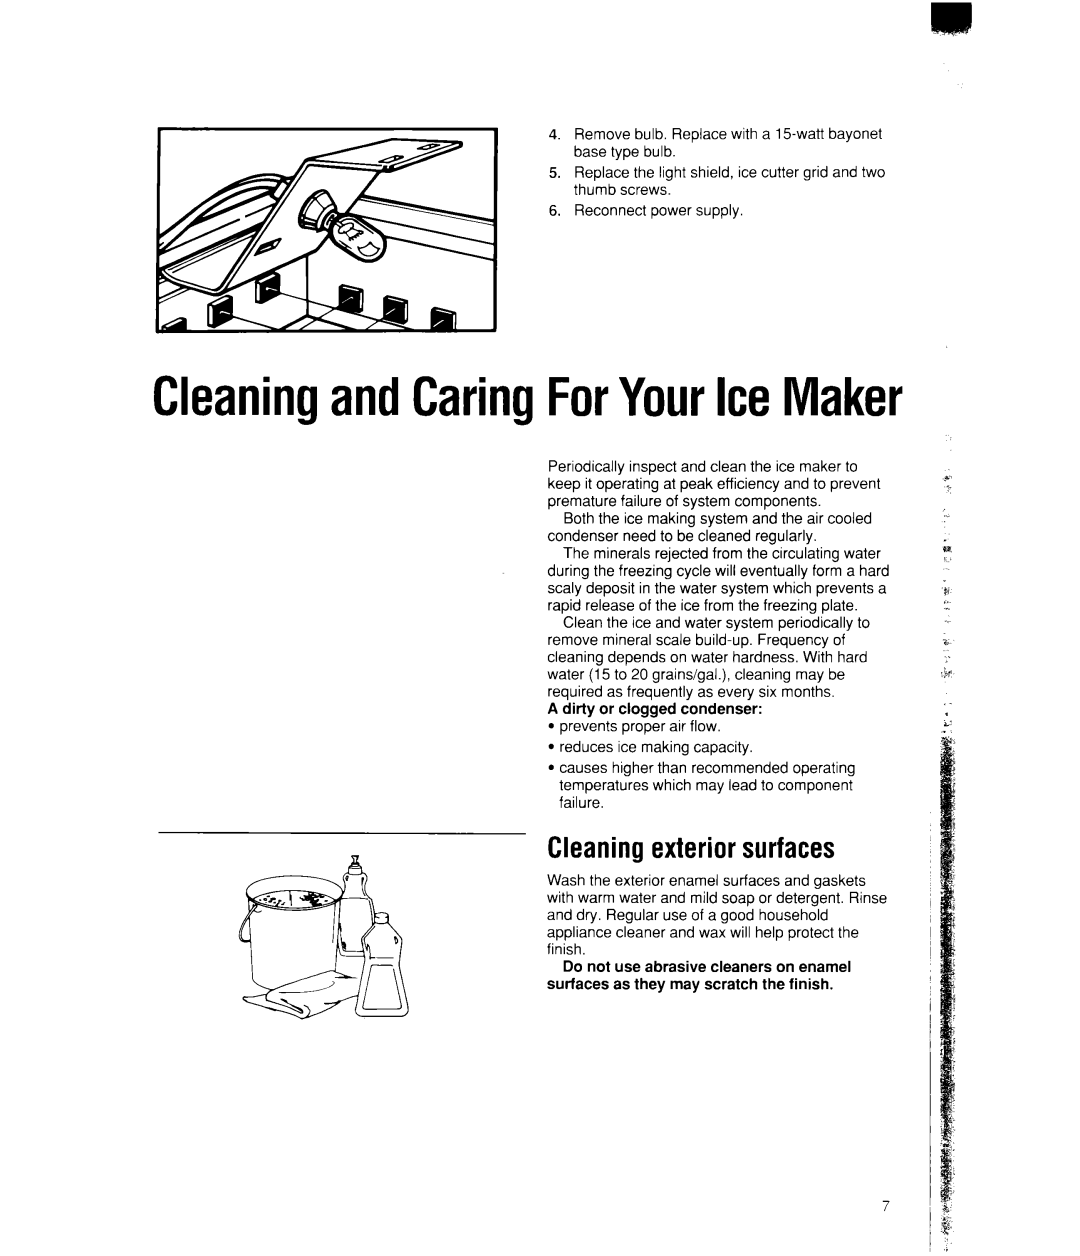 Whirlpool EC510 manual CleaningandCaringForYourIceMaker, Cleaningexteriorsurfaces 